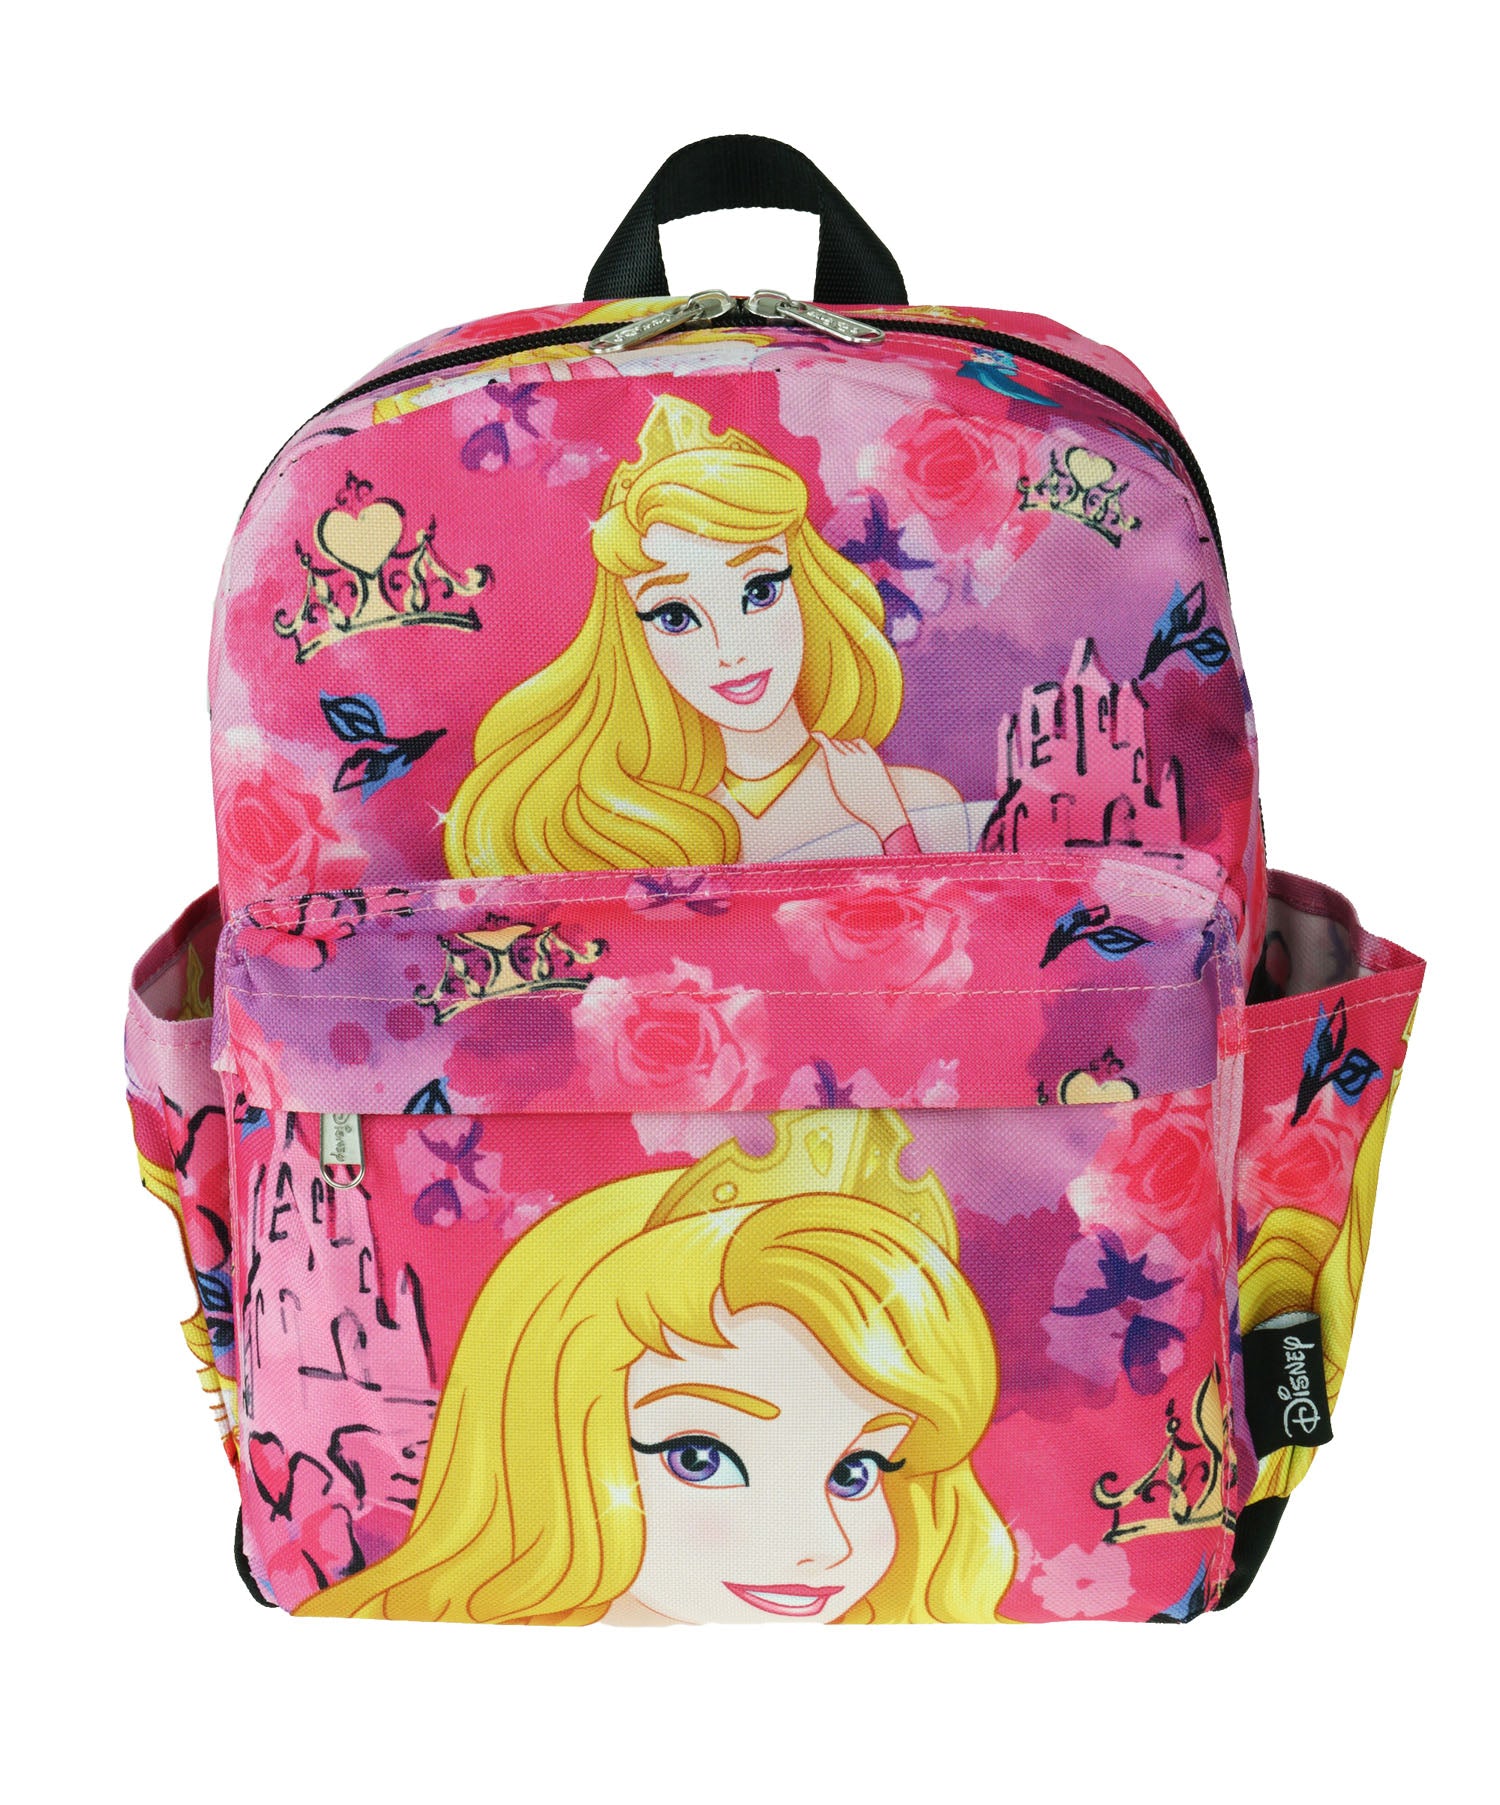 Sleeping Beauty Book Bag Exquisite Interesting Art Camping Bagpack with  Crossbody Bag and Pen Case 3Pcs/Set Good Gift For Girls Boys for Gift to